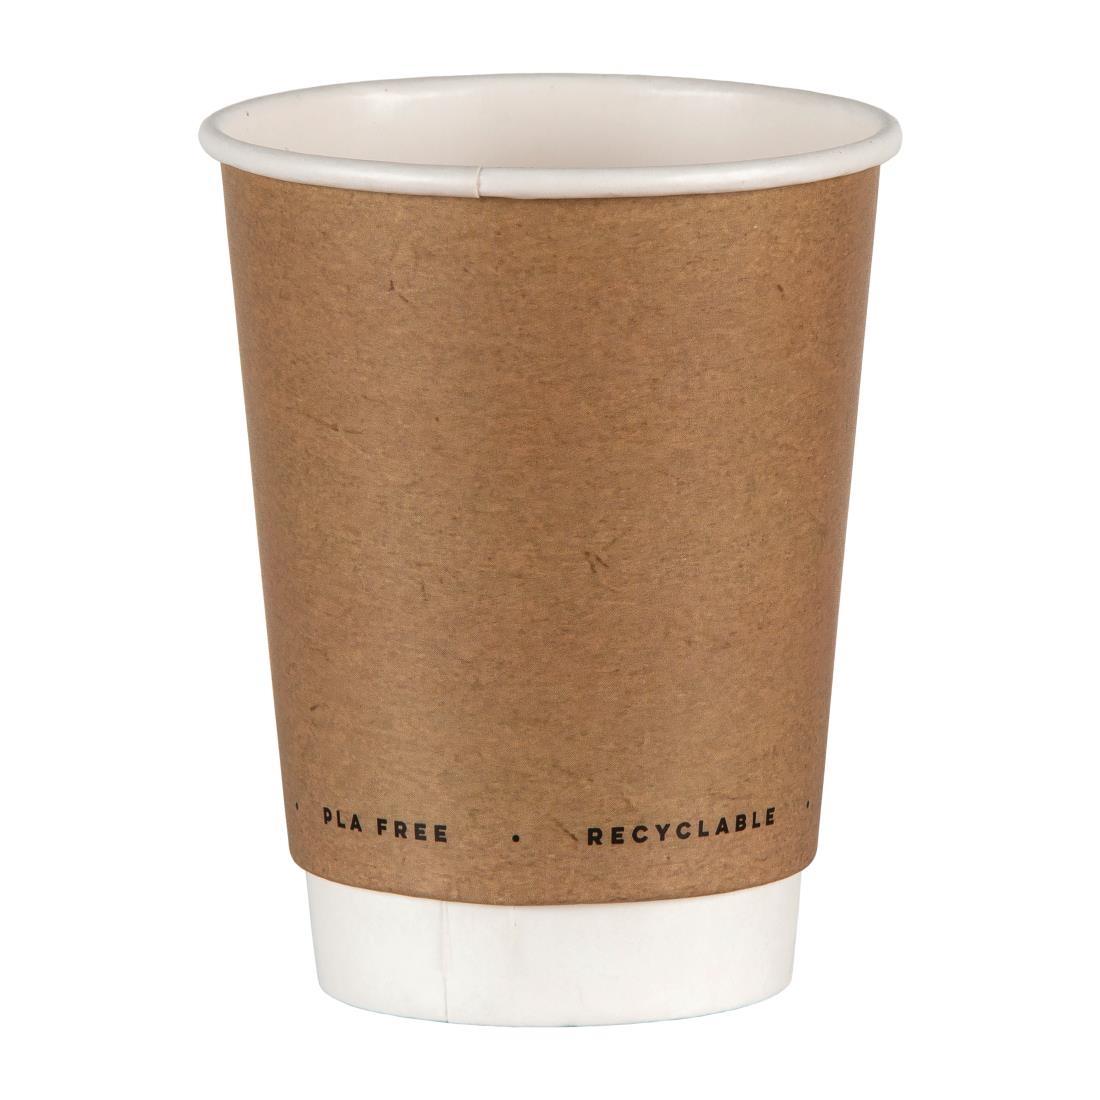 Fiesta Green Plastic-Free Compostable Hot Cups Double Wall 340ml / 12oz x 500 - FB953  - 1